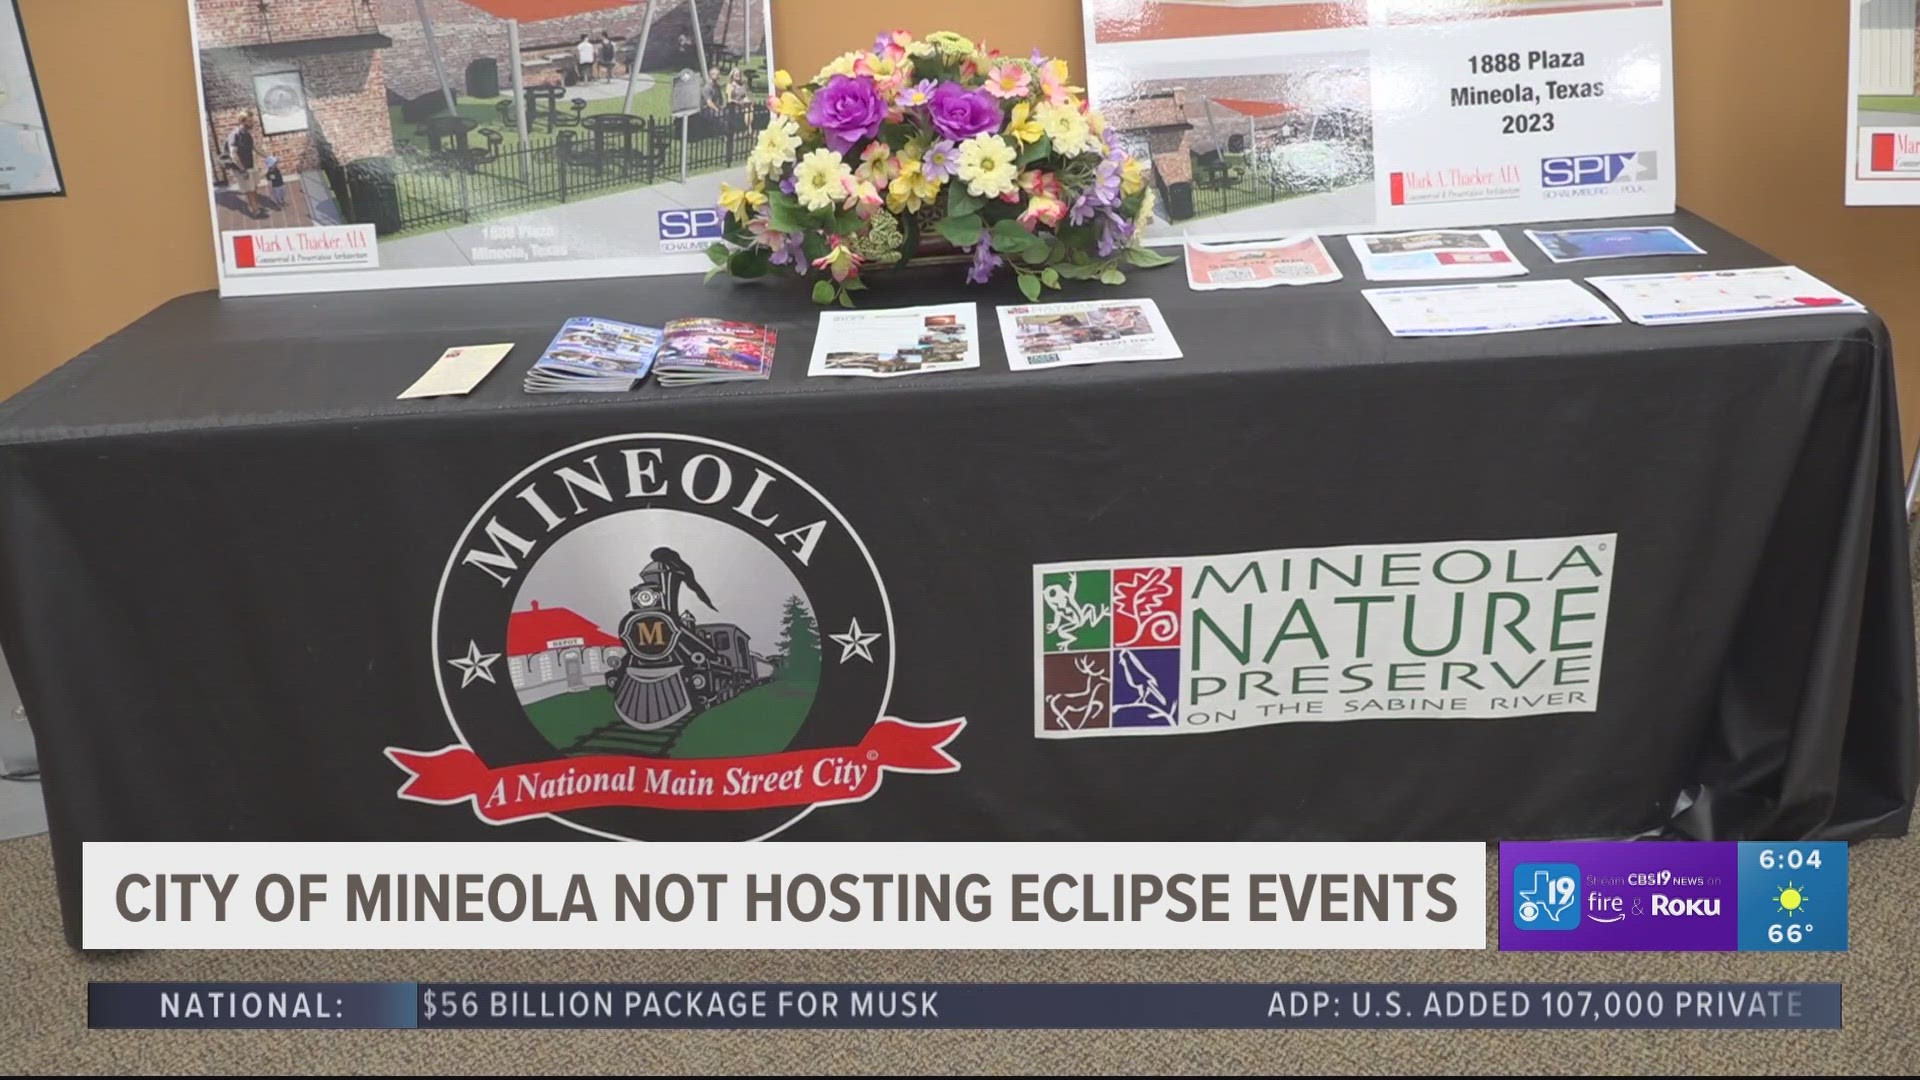 Tiner said hosting an eclipse viewing party would put a strain on the city’s resources, which is what happened during the last eclipse in 2017.